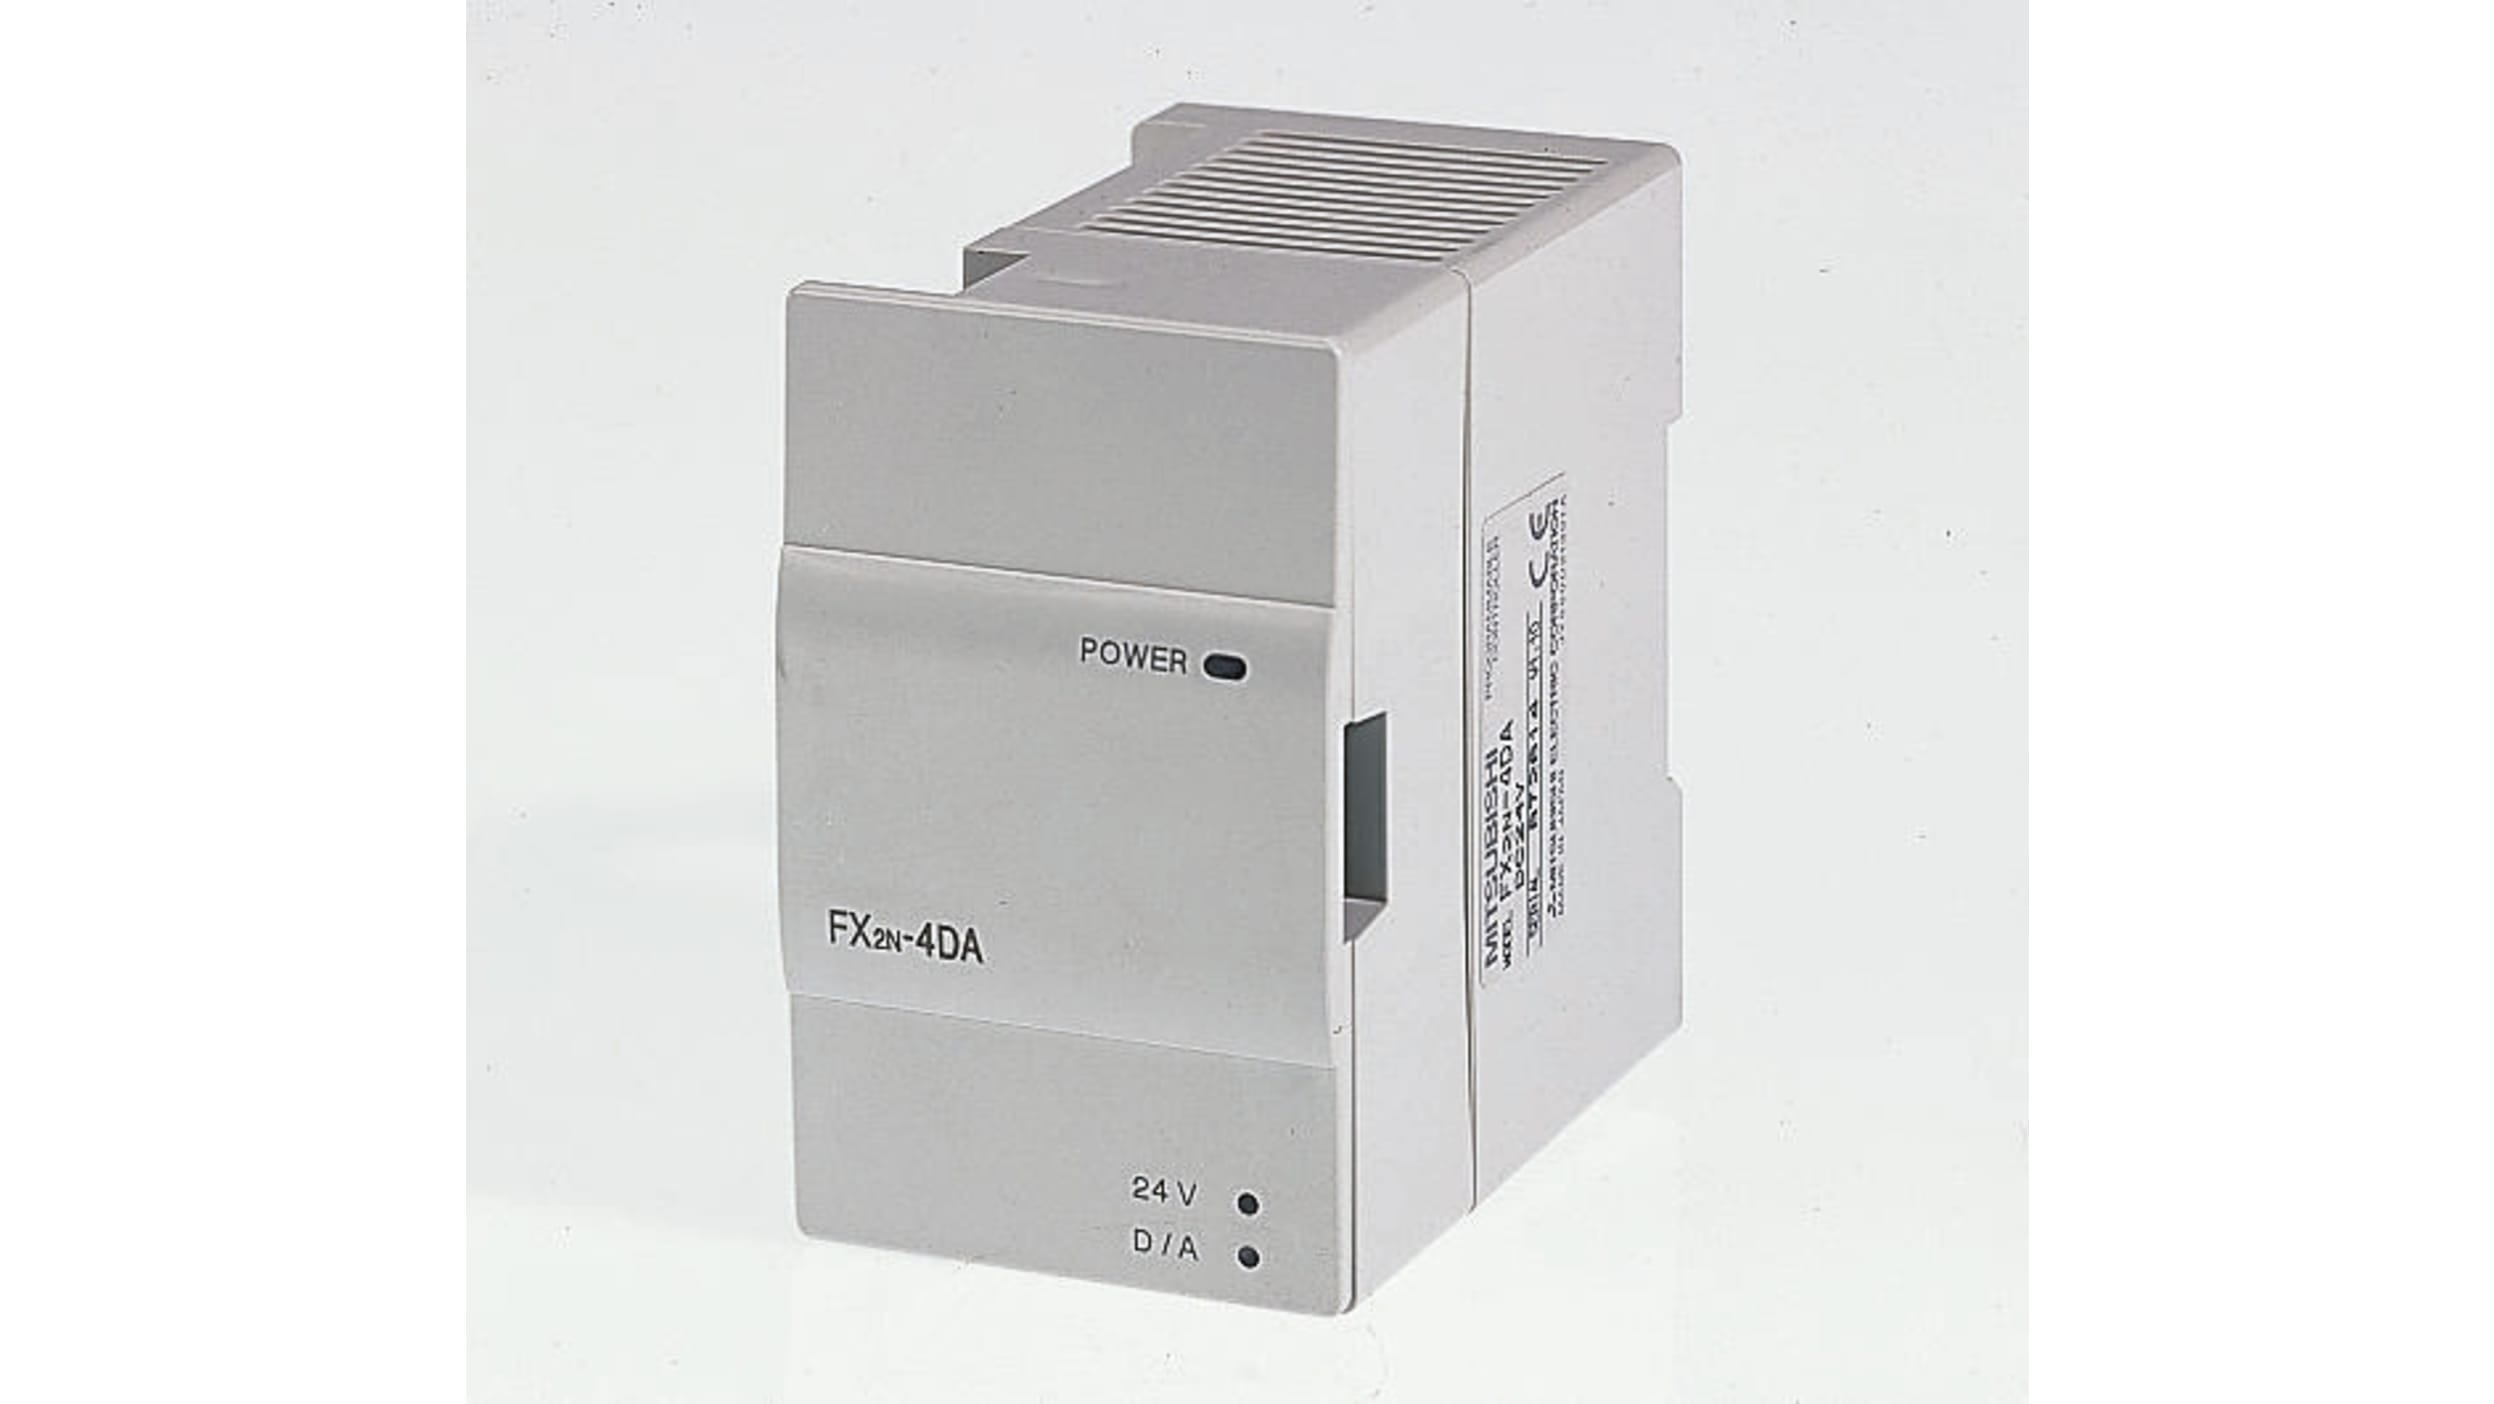 FX2N-2AD Mitsubishi PLC Expansion Module for use with FX2N Series, 90 x 43  x 87 mm, Analogue, Digital, 24 V dc RS